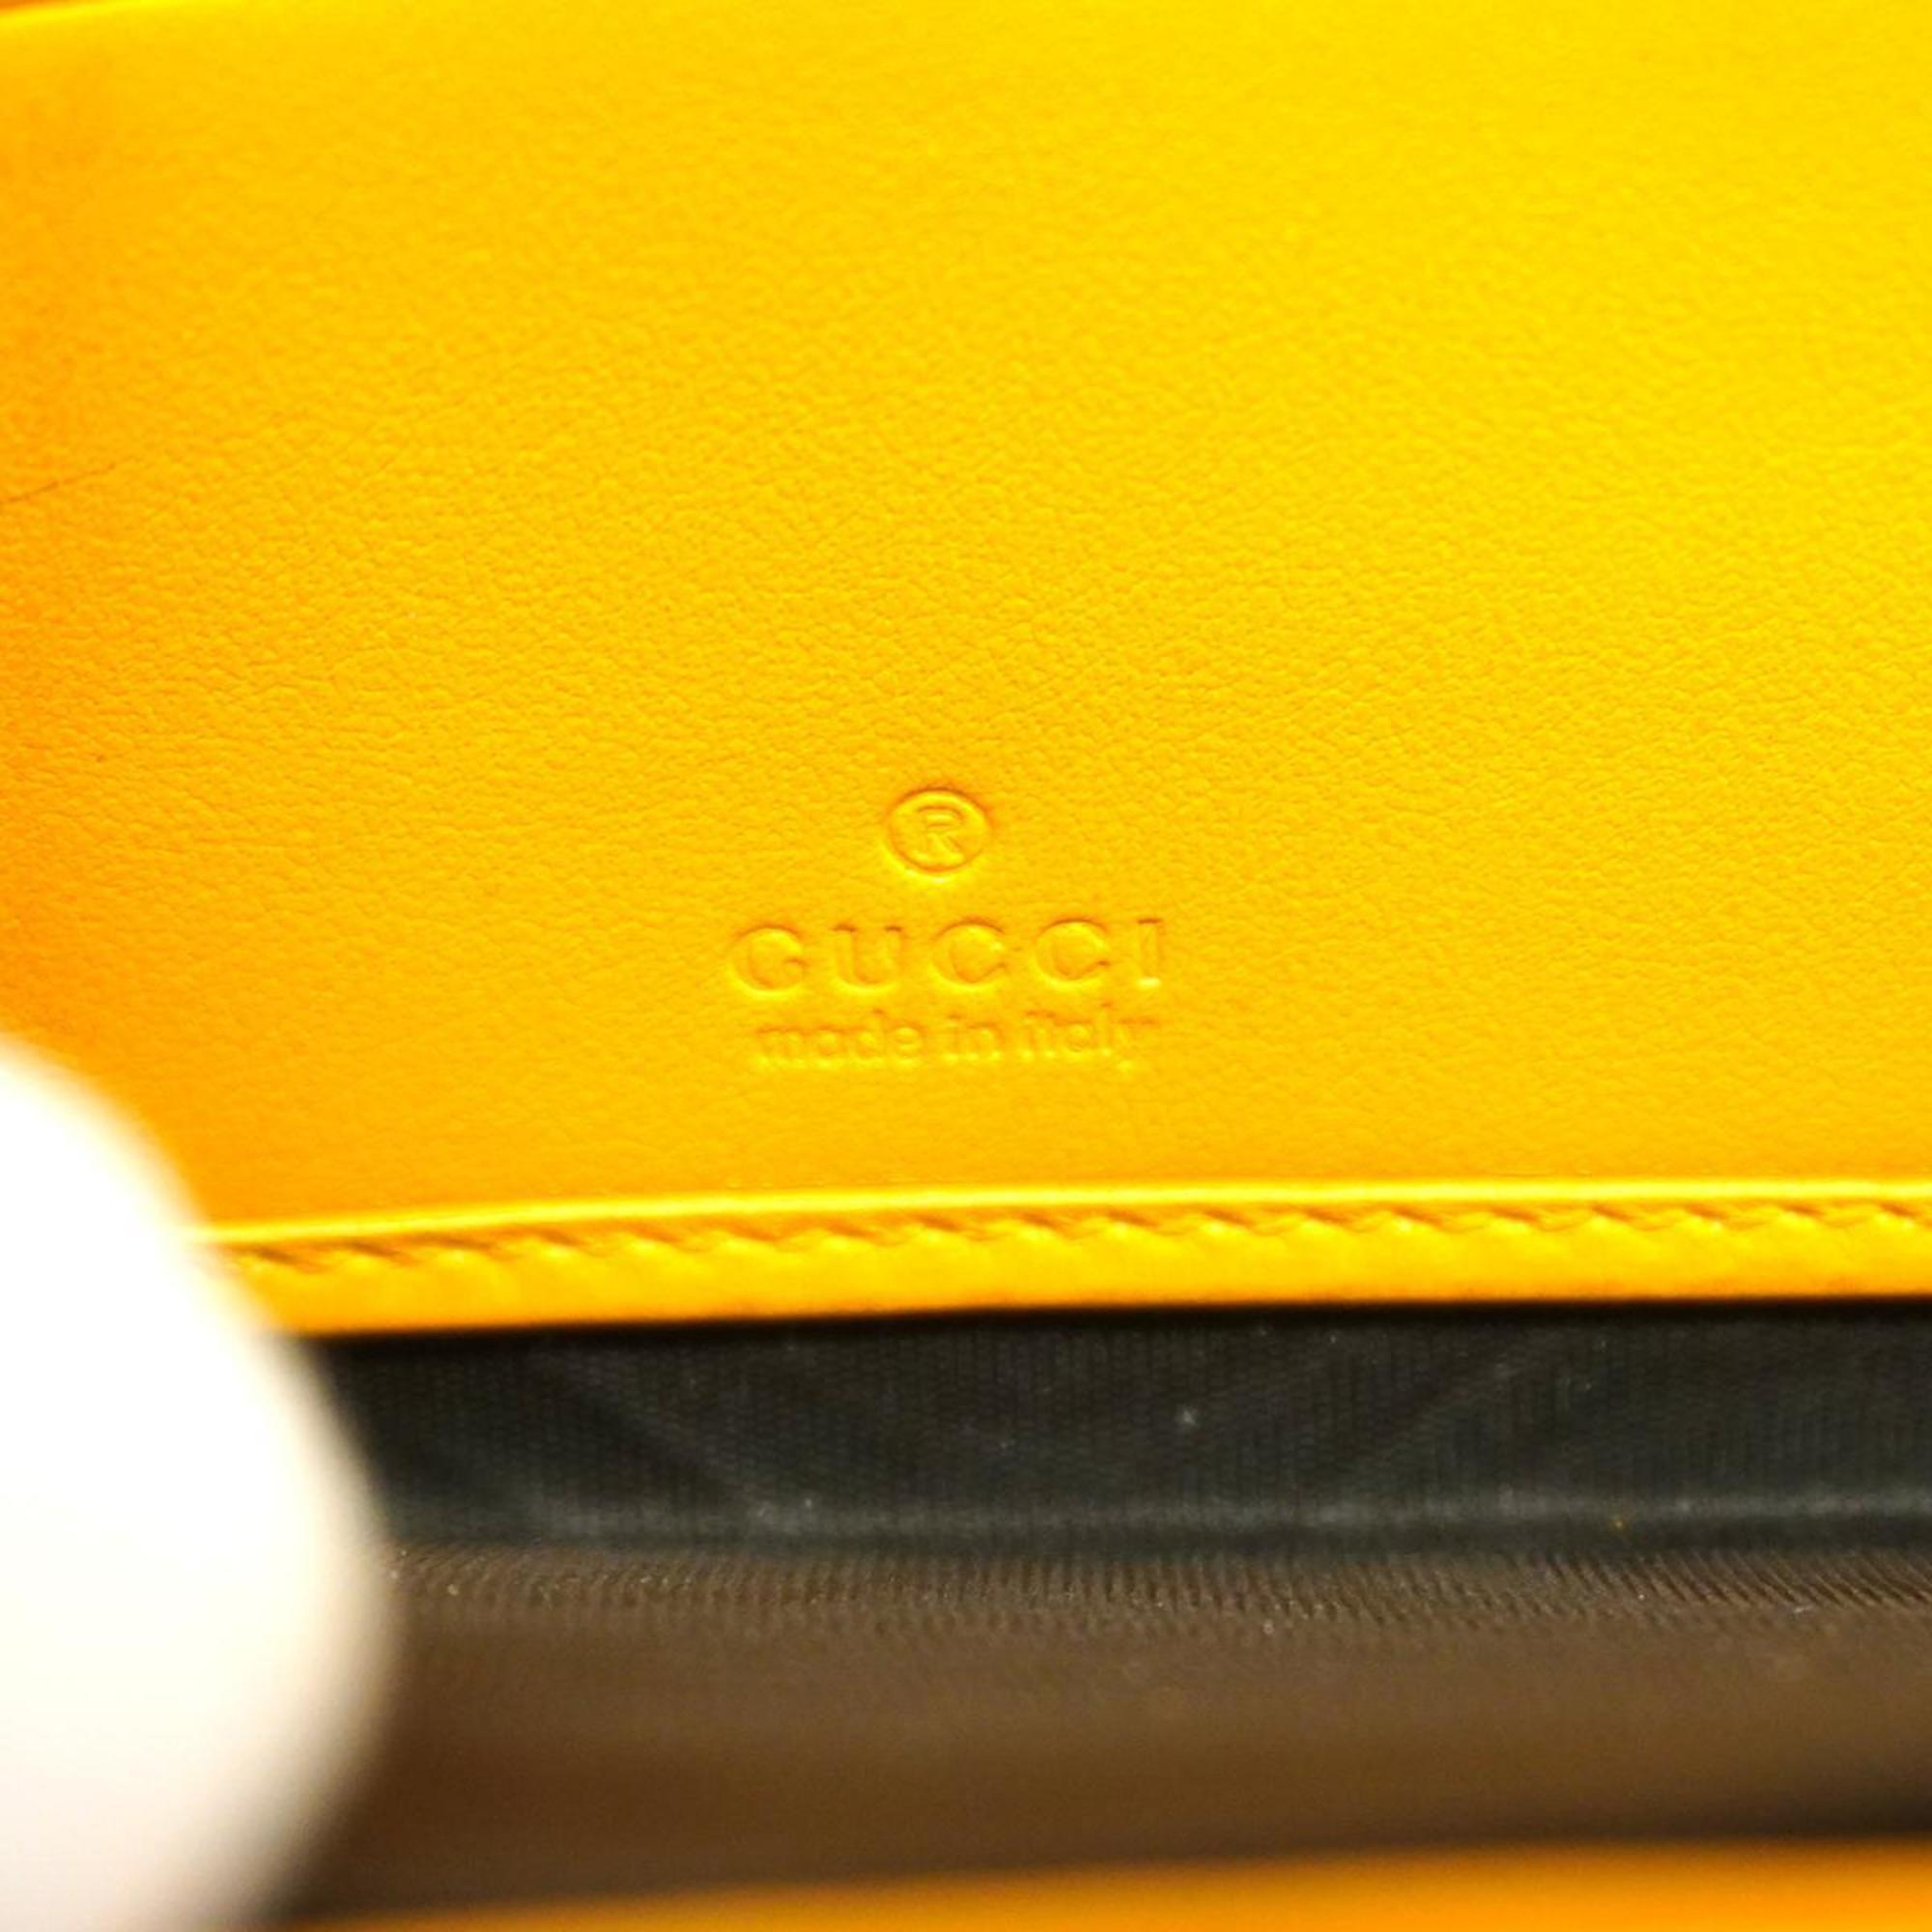 Gucci Long Wallet GG Embossed 625558 Leather Yellow Men's